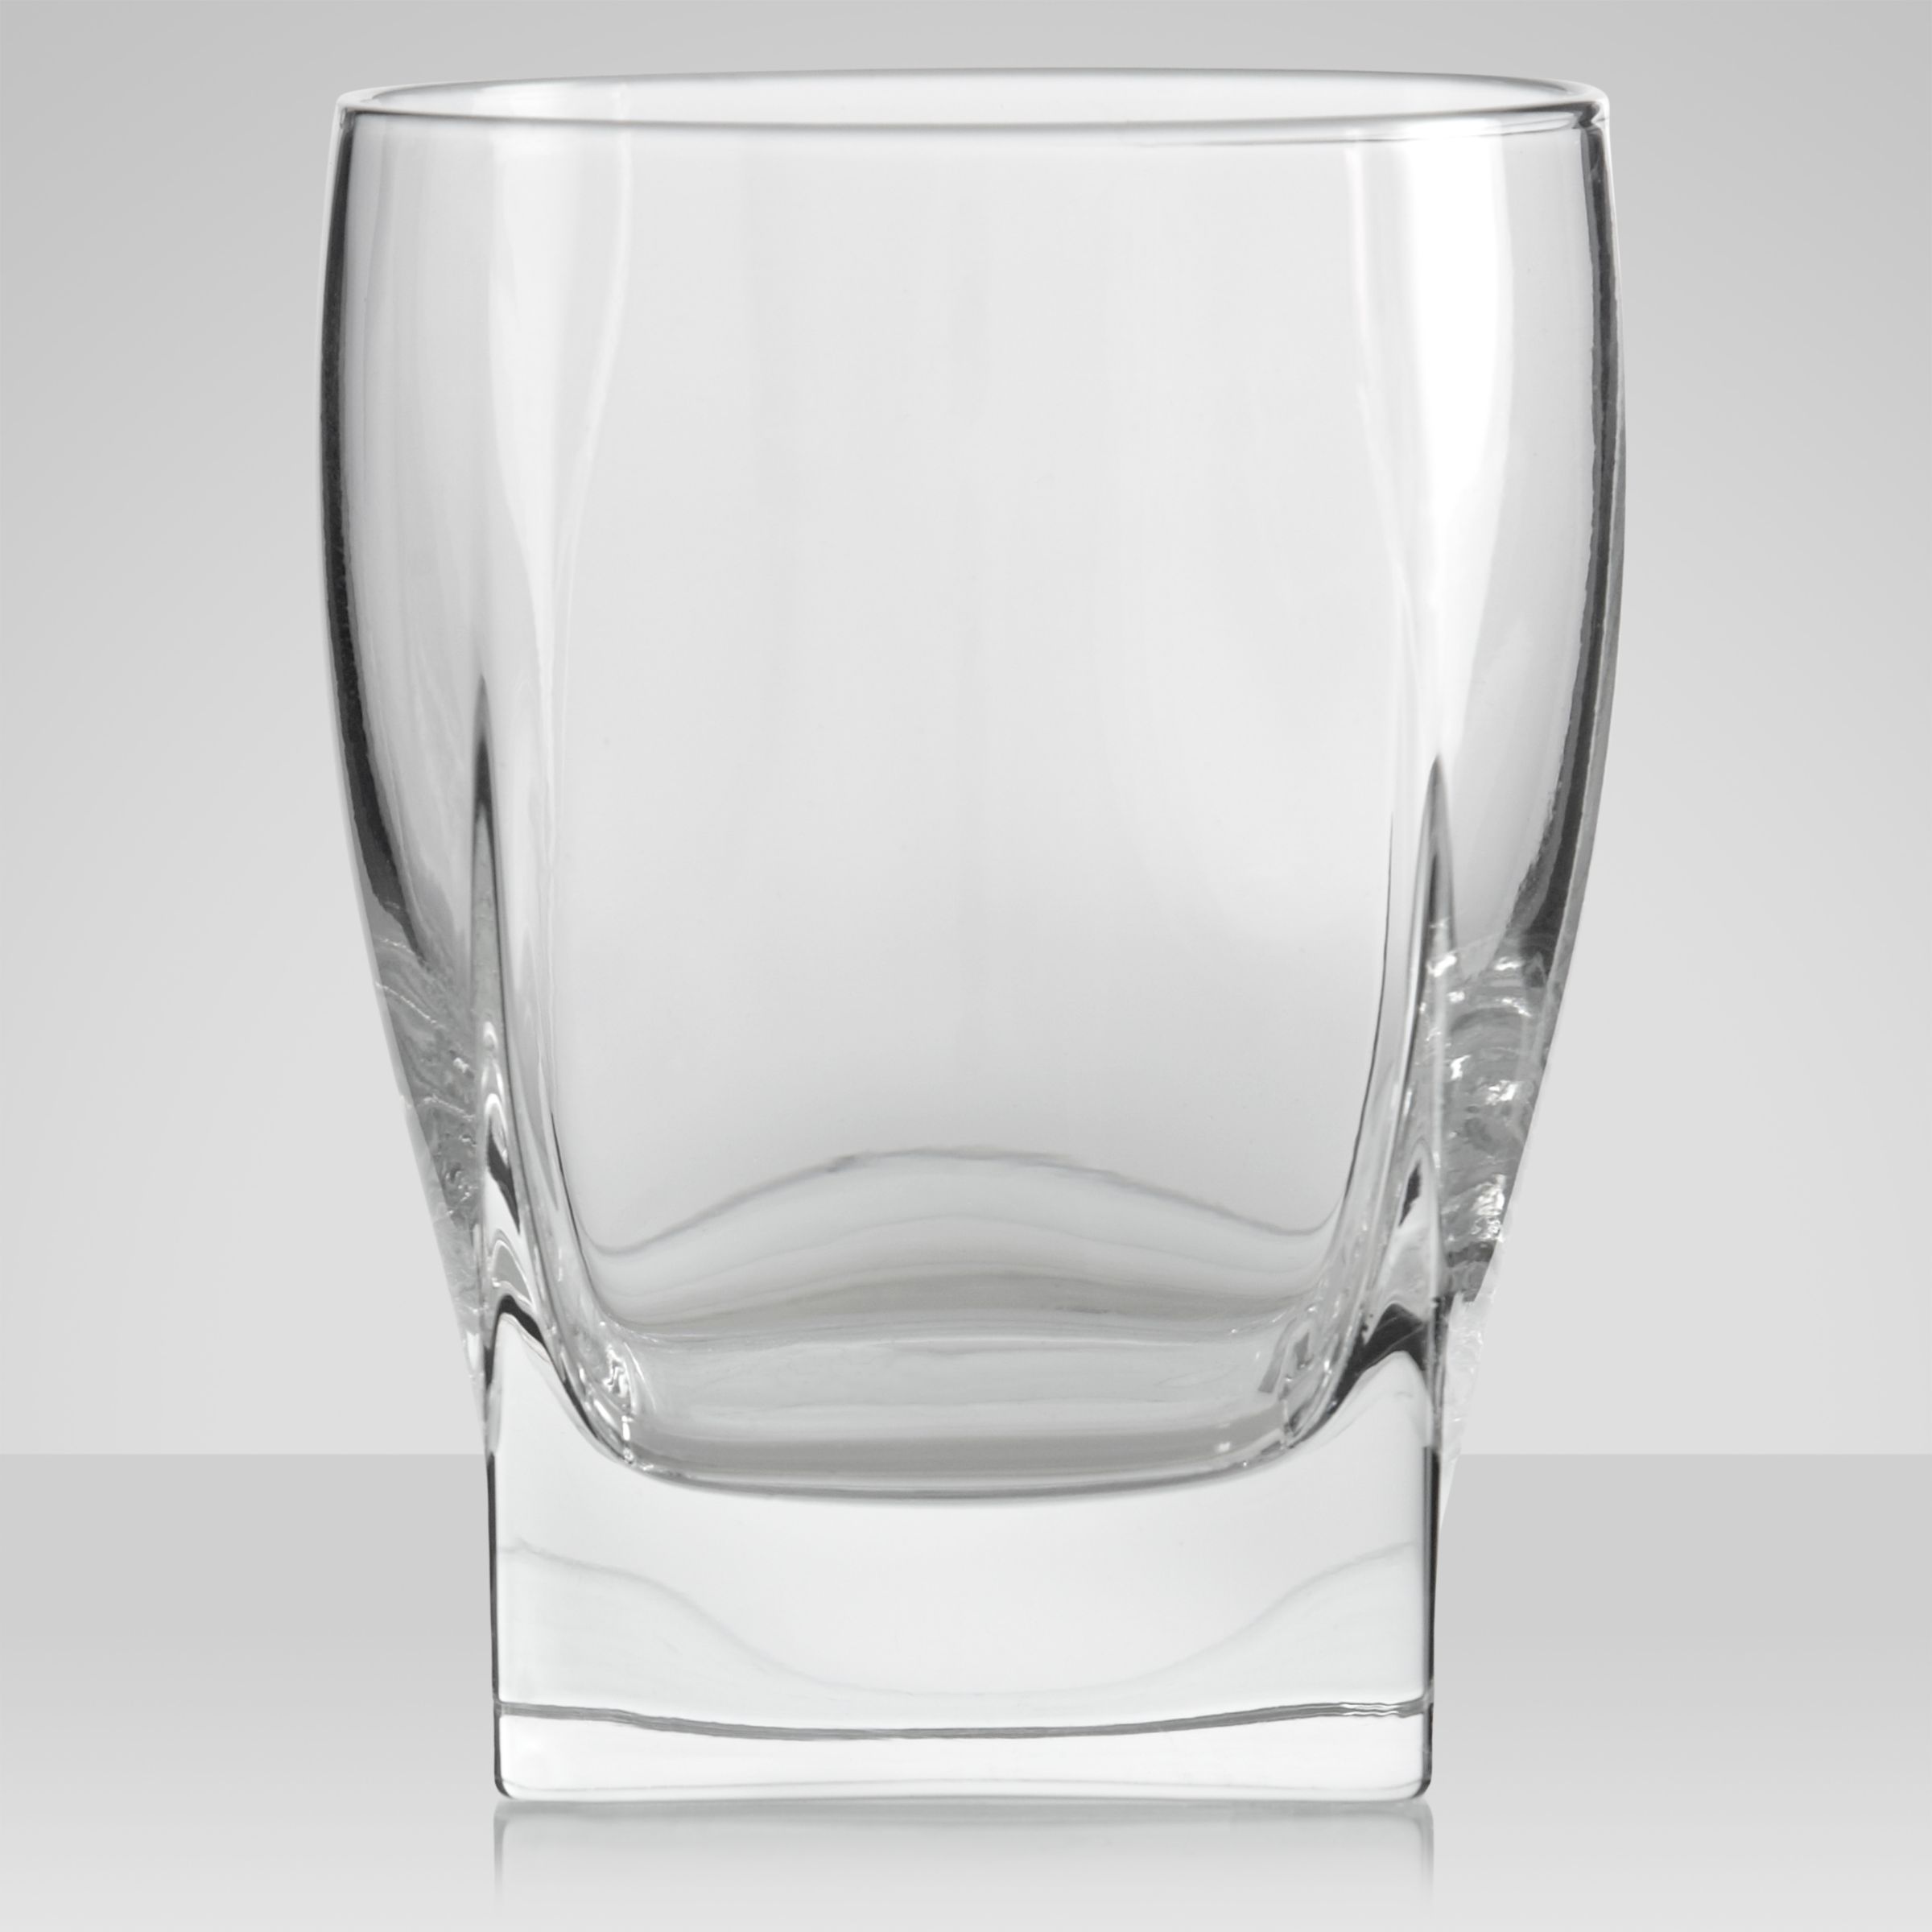 Western House Rossini Small Whisky Tumbler, Set of 4